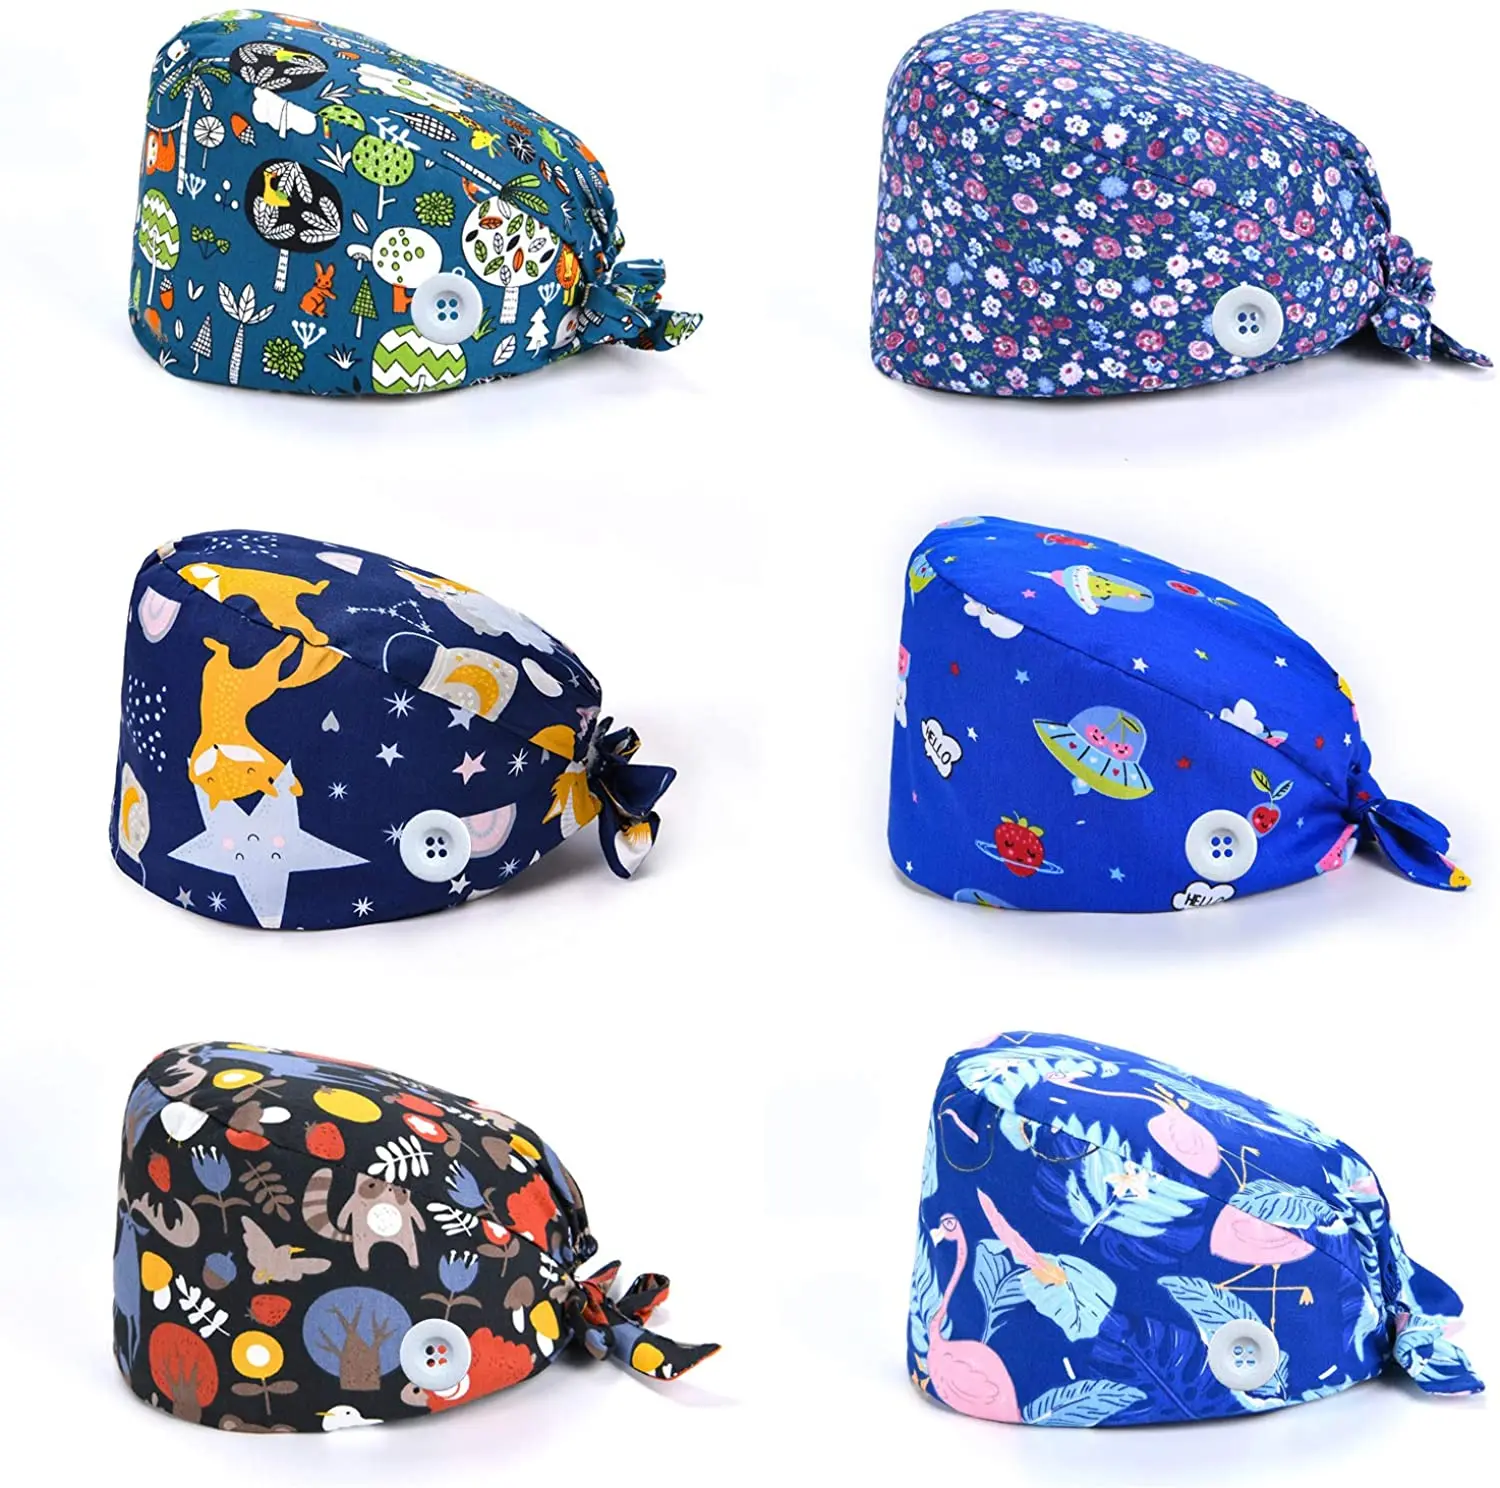 

Women and Men Practical Nurse Working Cotton Sweatband bouffant Printed Scrub Hat with Button